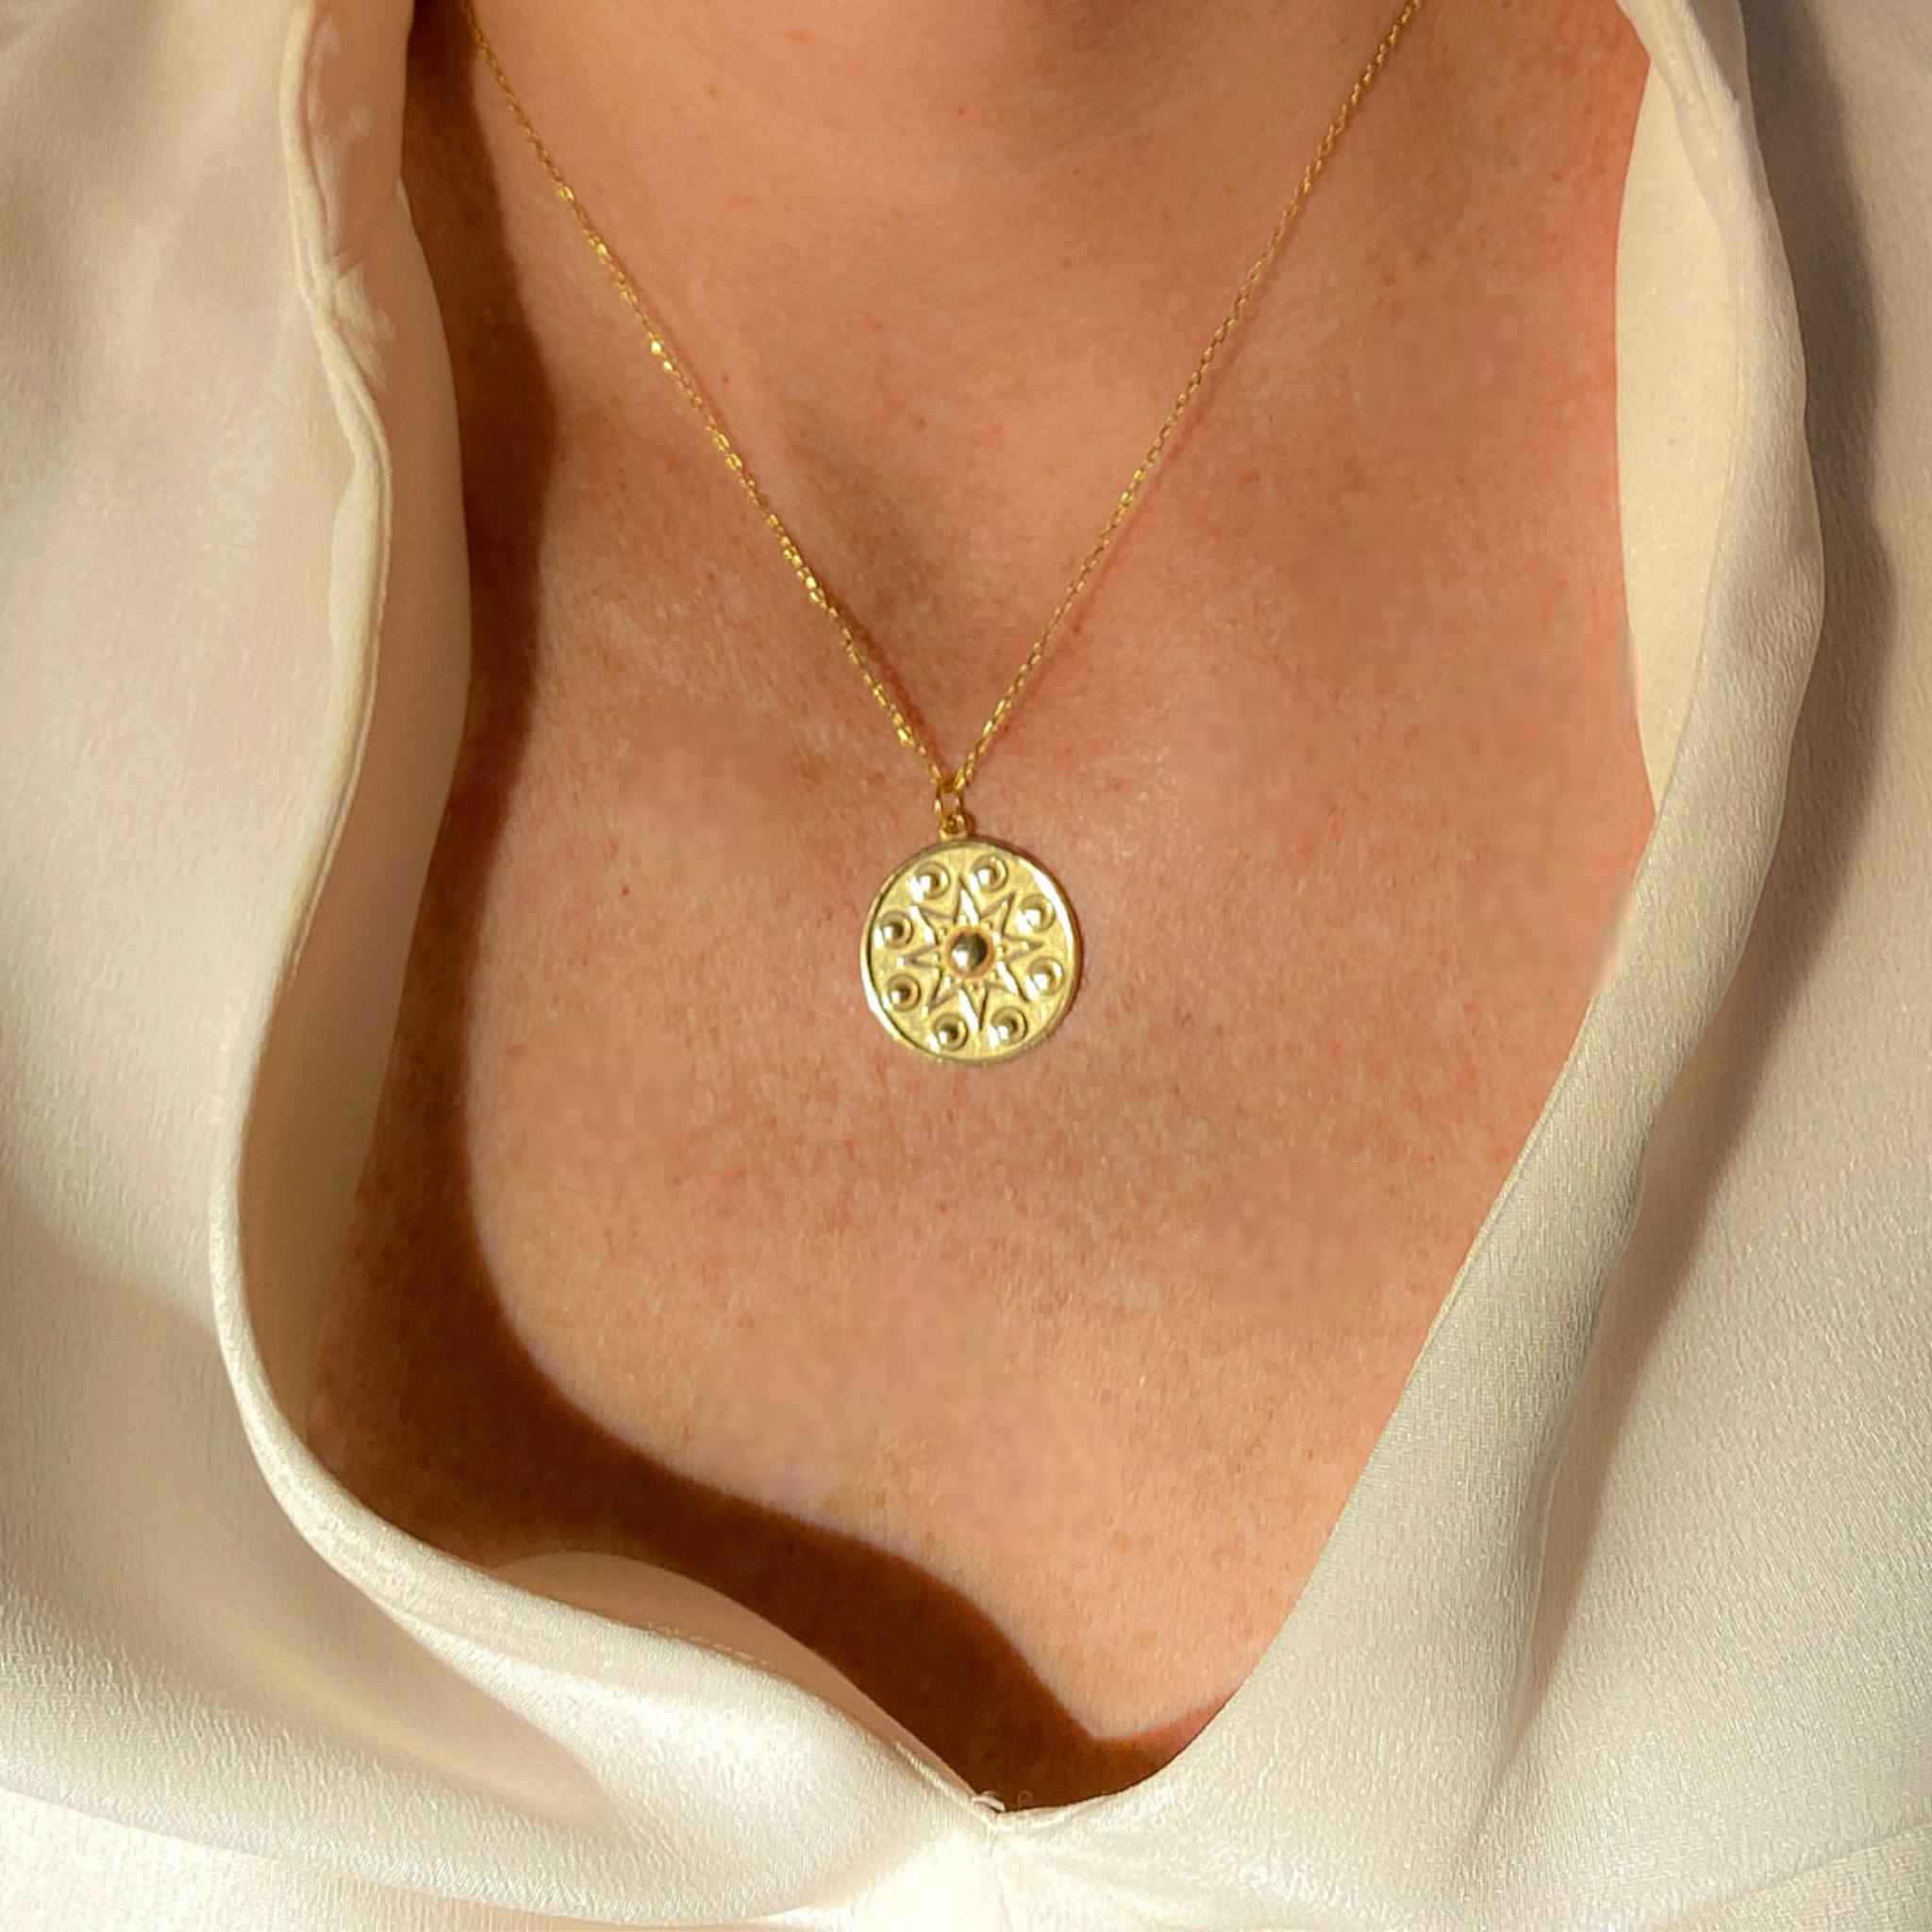 Close-up view of 18k gold star pendant necklace - Modern quiet luxury trend by Alessandra James.